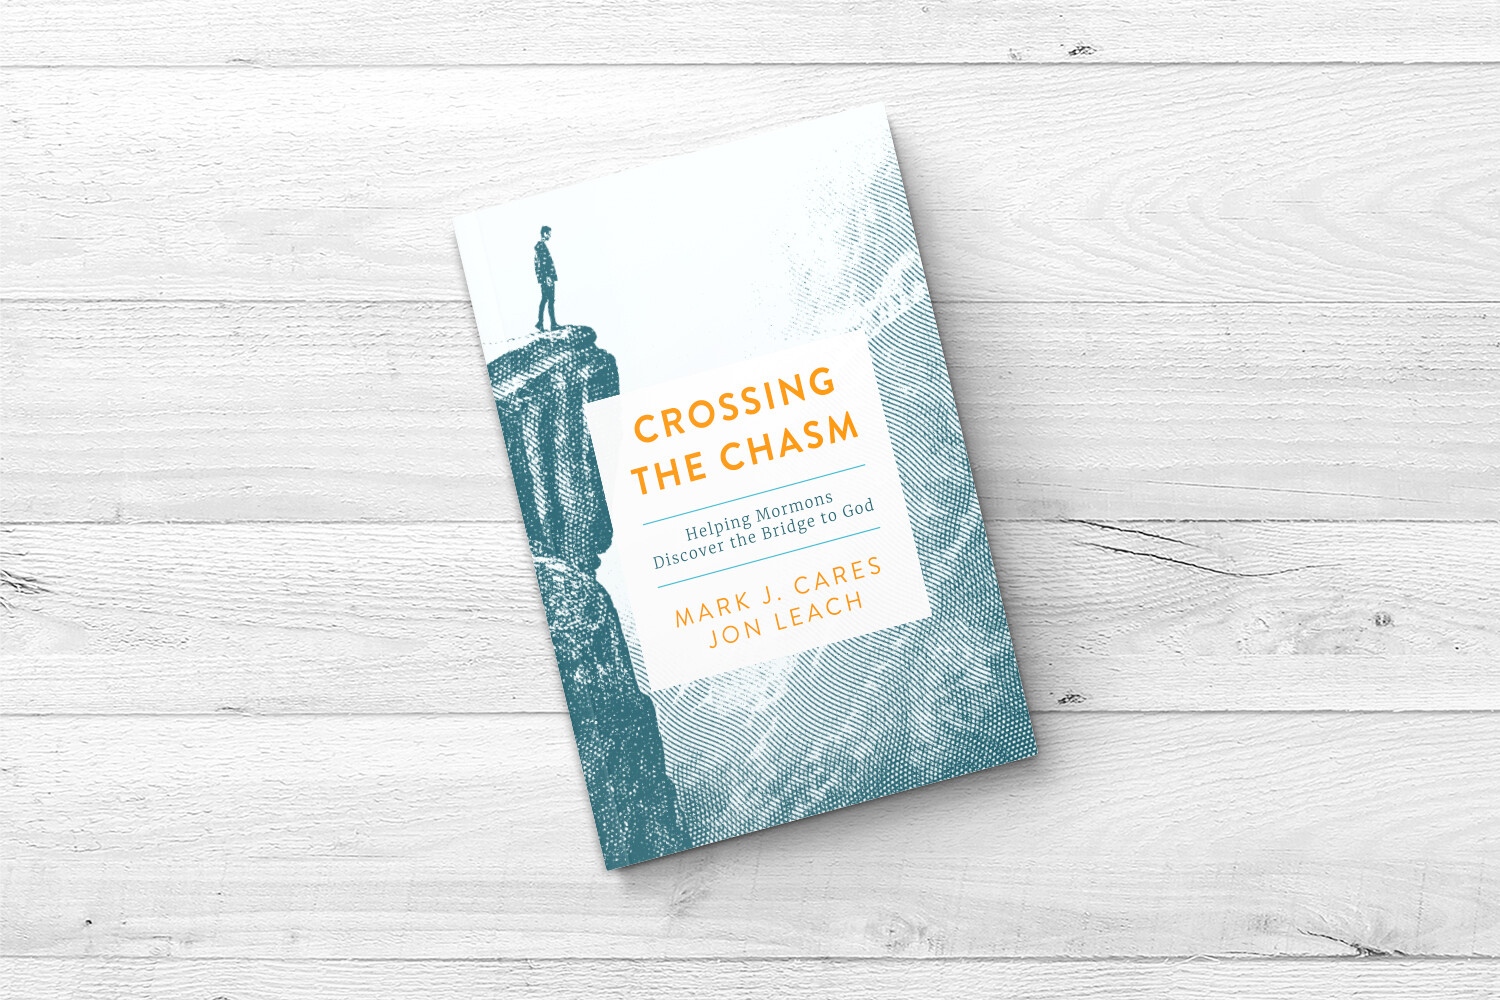 Crossing the Chasm: Helping Mormons Discover the Bridge to God